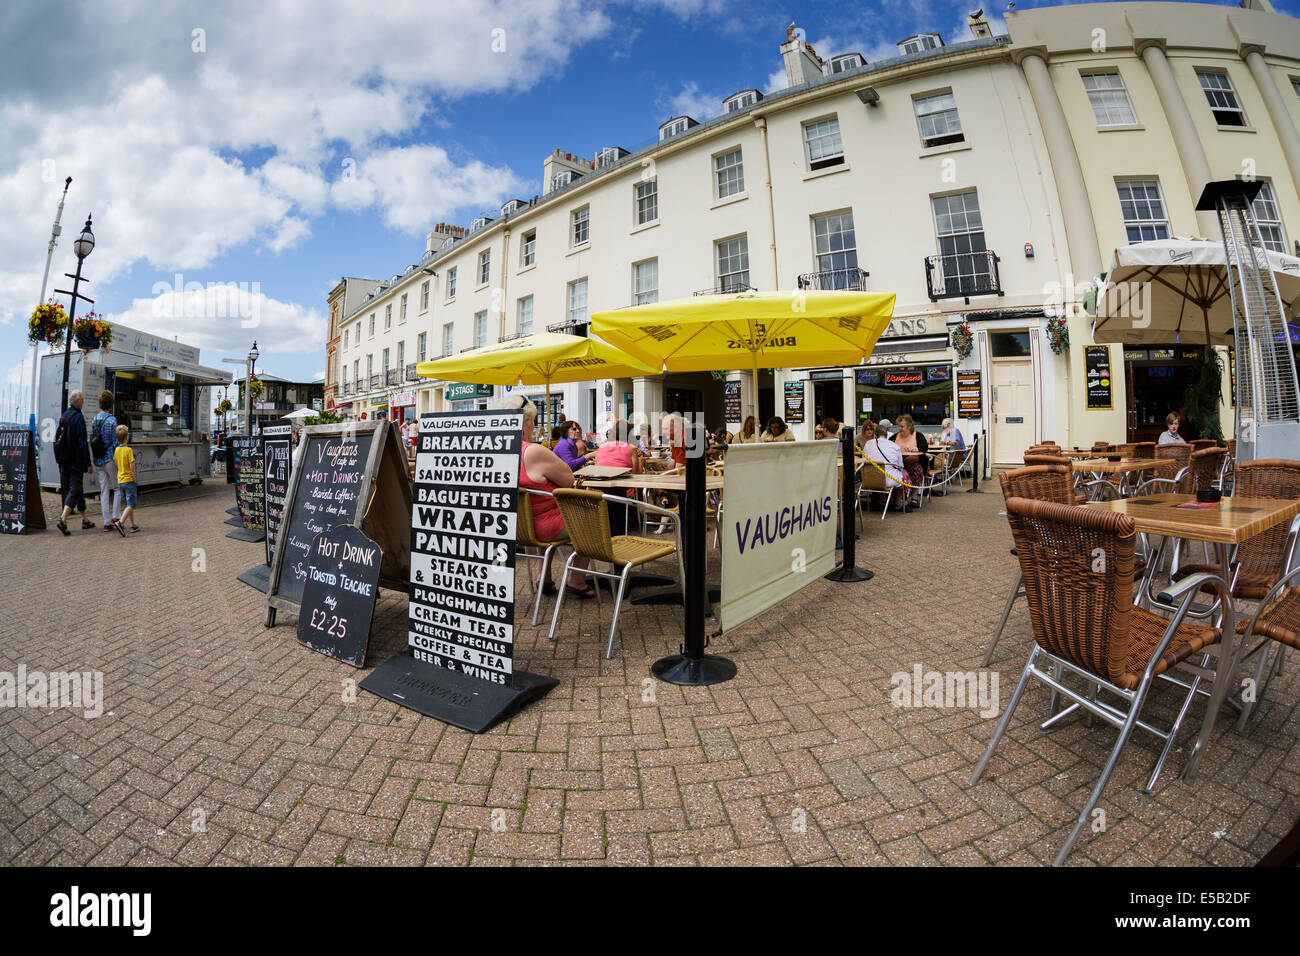 Shops Torquay High Resolution Stock Photography and Images - Alamy